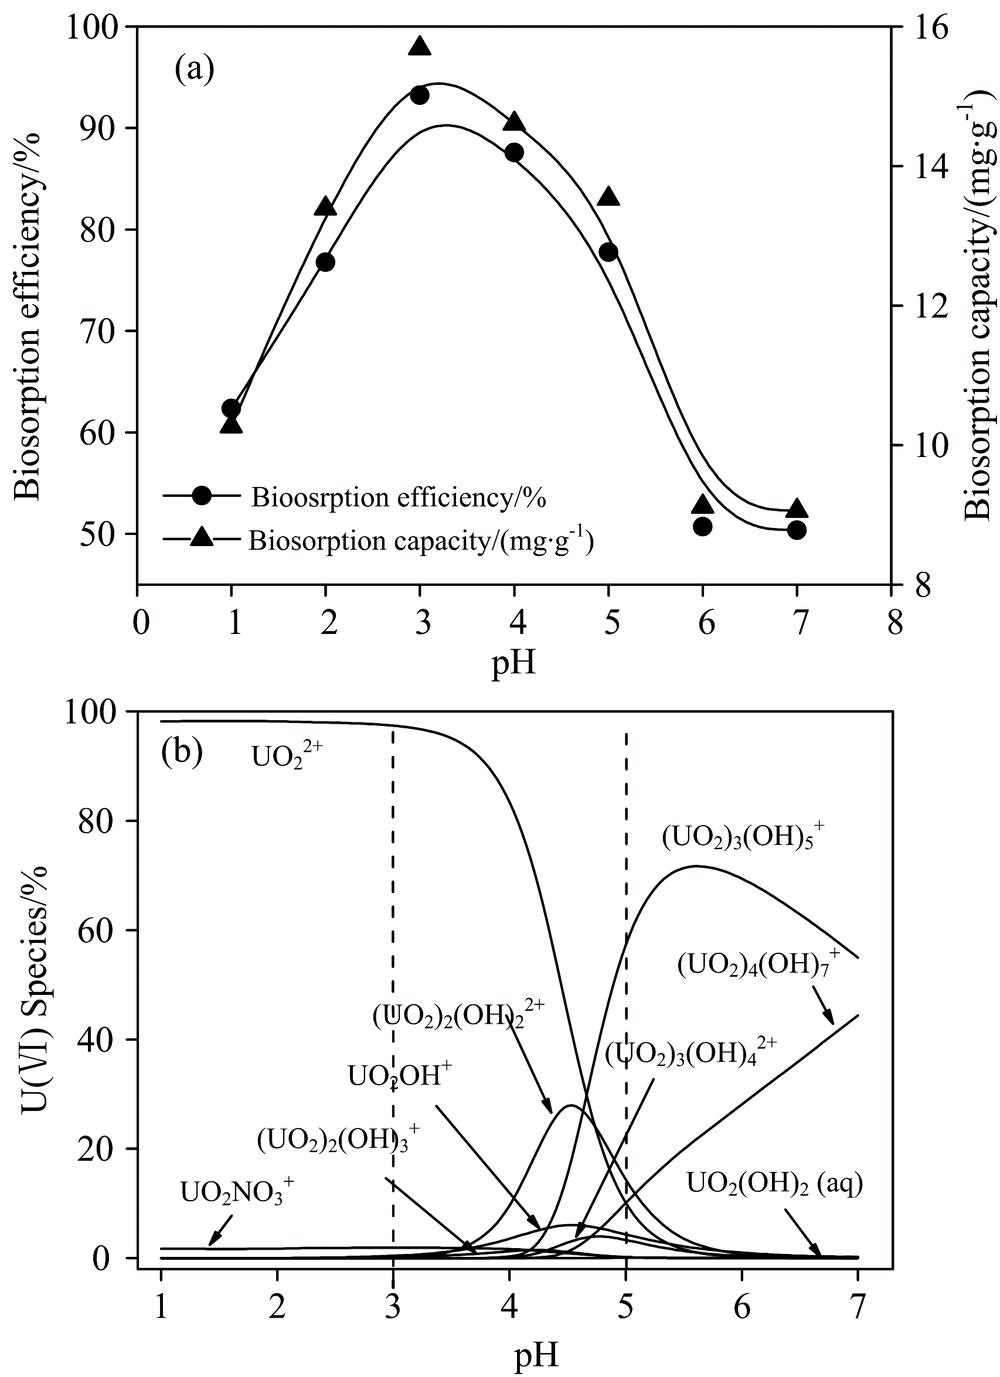 (a) Effect of initial pH on biosorption of uranium by S. cerevisiae, (b) The relative species distribution of 100 mg·L-1 U(Ⅵ) at different pH calculated by Visual MINTEQ 3.1 (c0=100 mg·L-1, T=25 ℃, M=5 g·L-1, t=60 min)